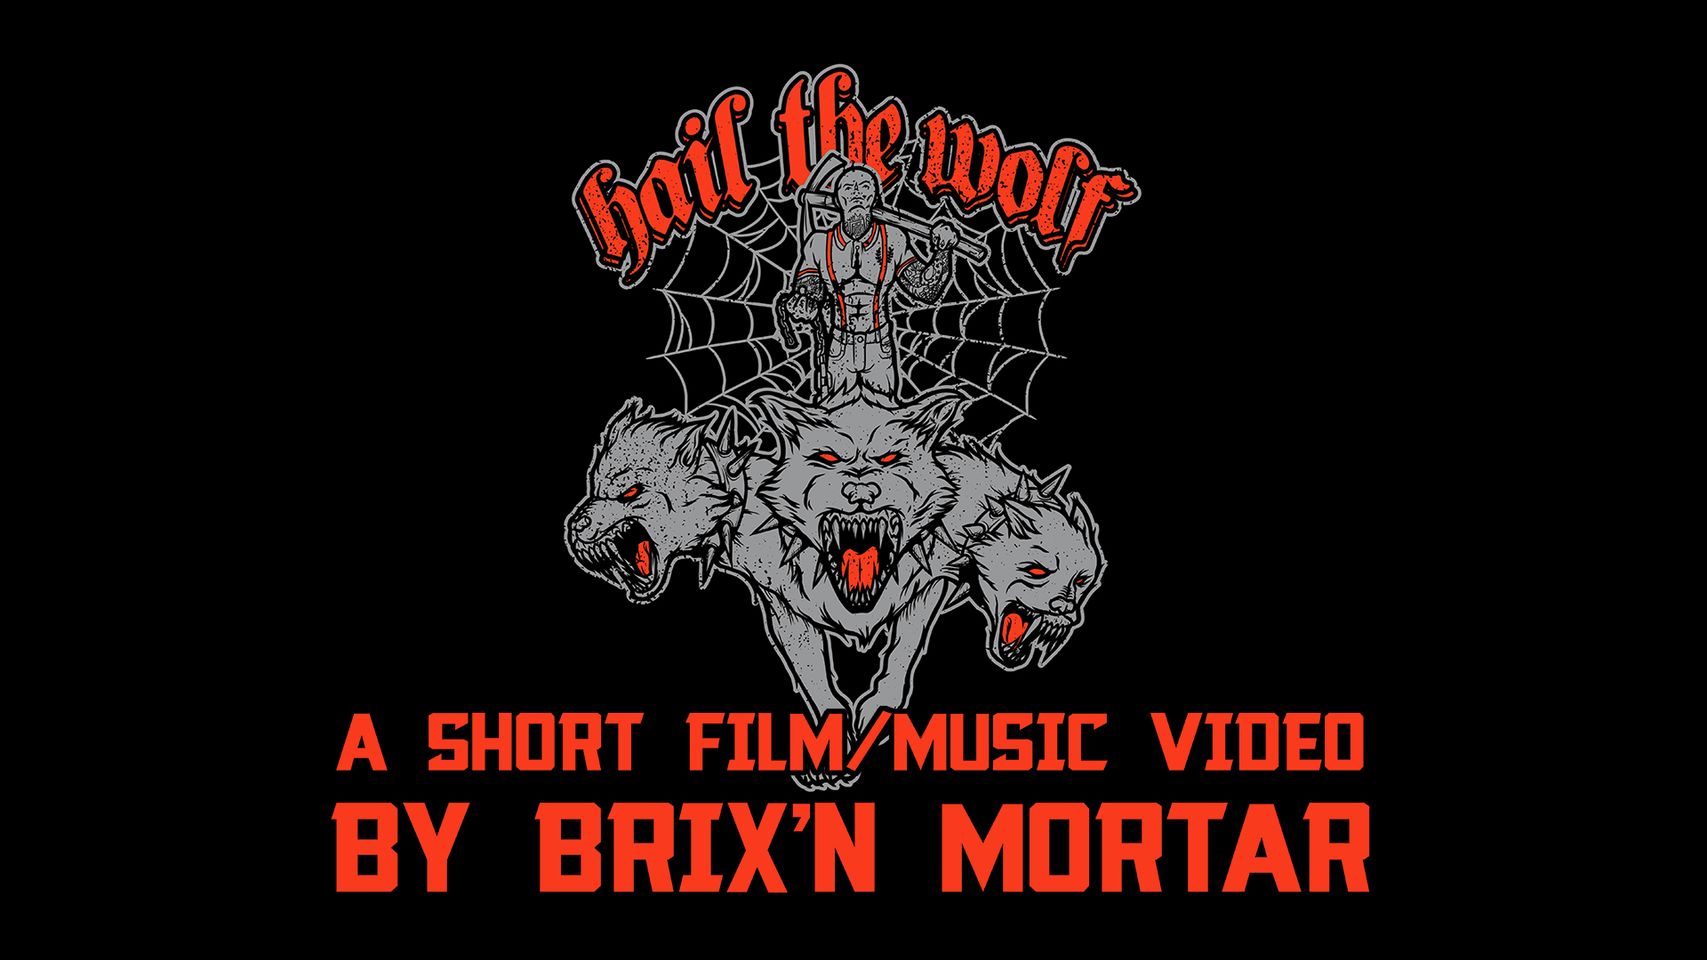 The logo for the short film music video by brian mortar.